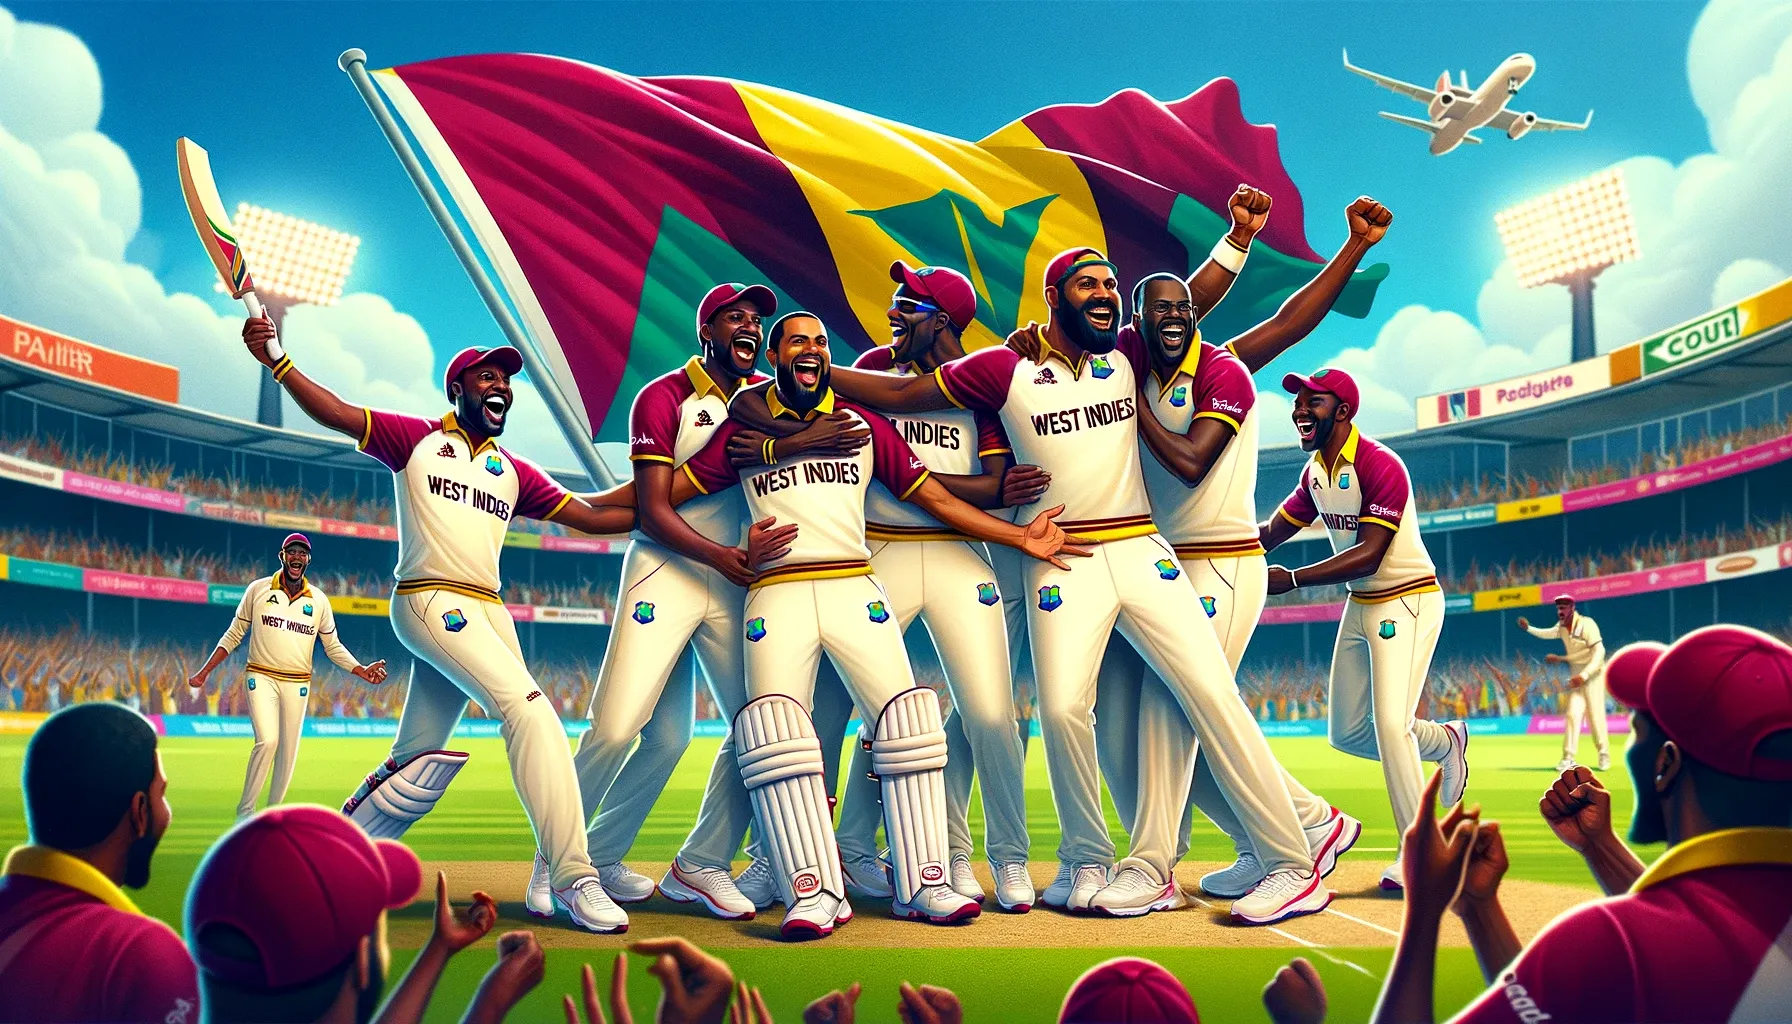 West Indies National Cricket Team: The Windies’ Path to Victory